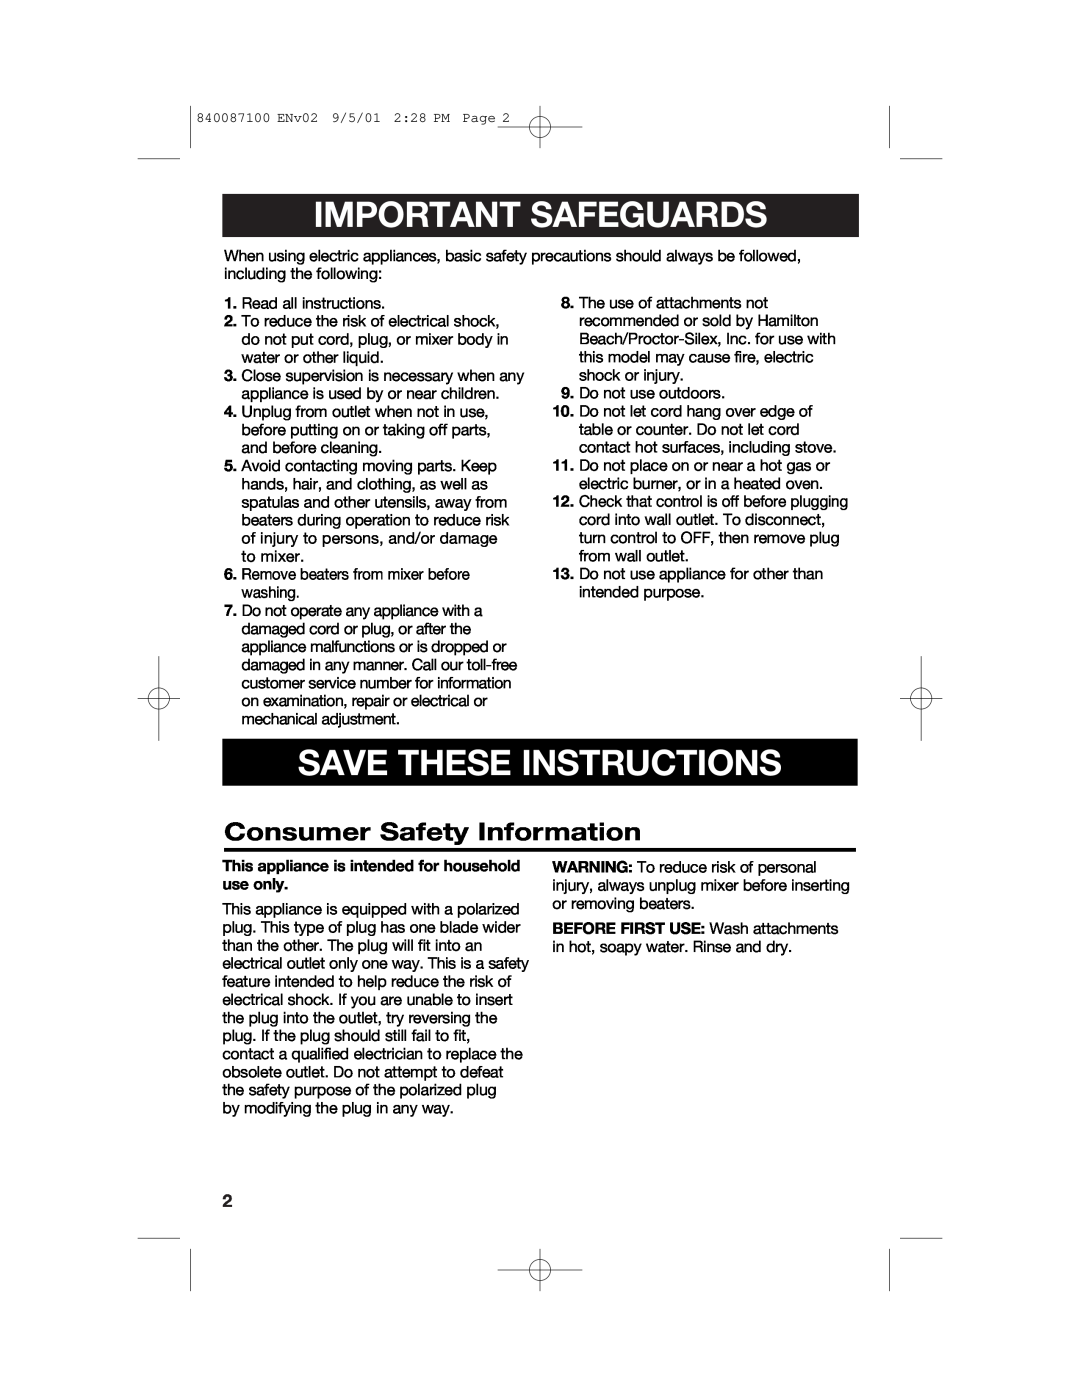 Hamilton Beach 62000 manual Consumer Safety Information, Important Safeguards, Save These Instructions 